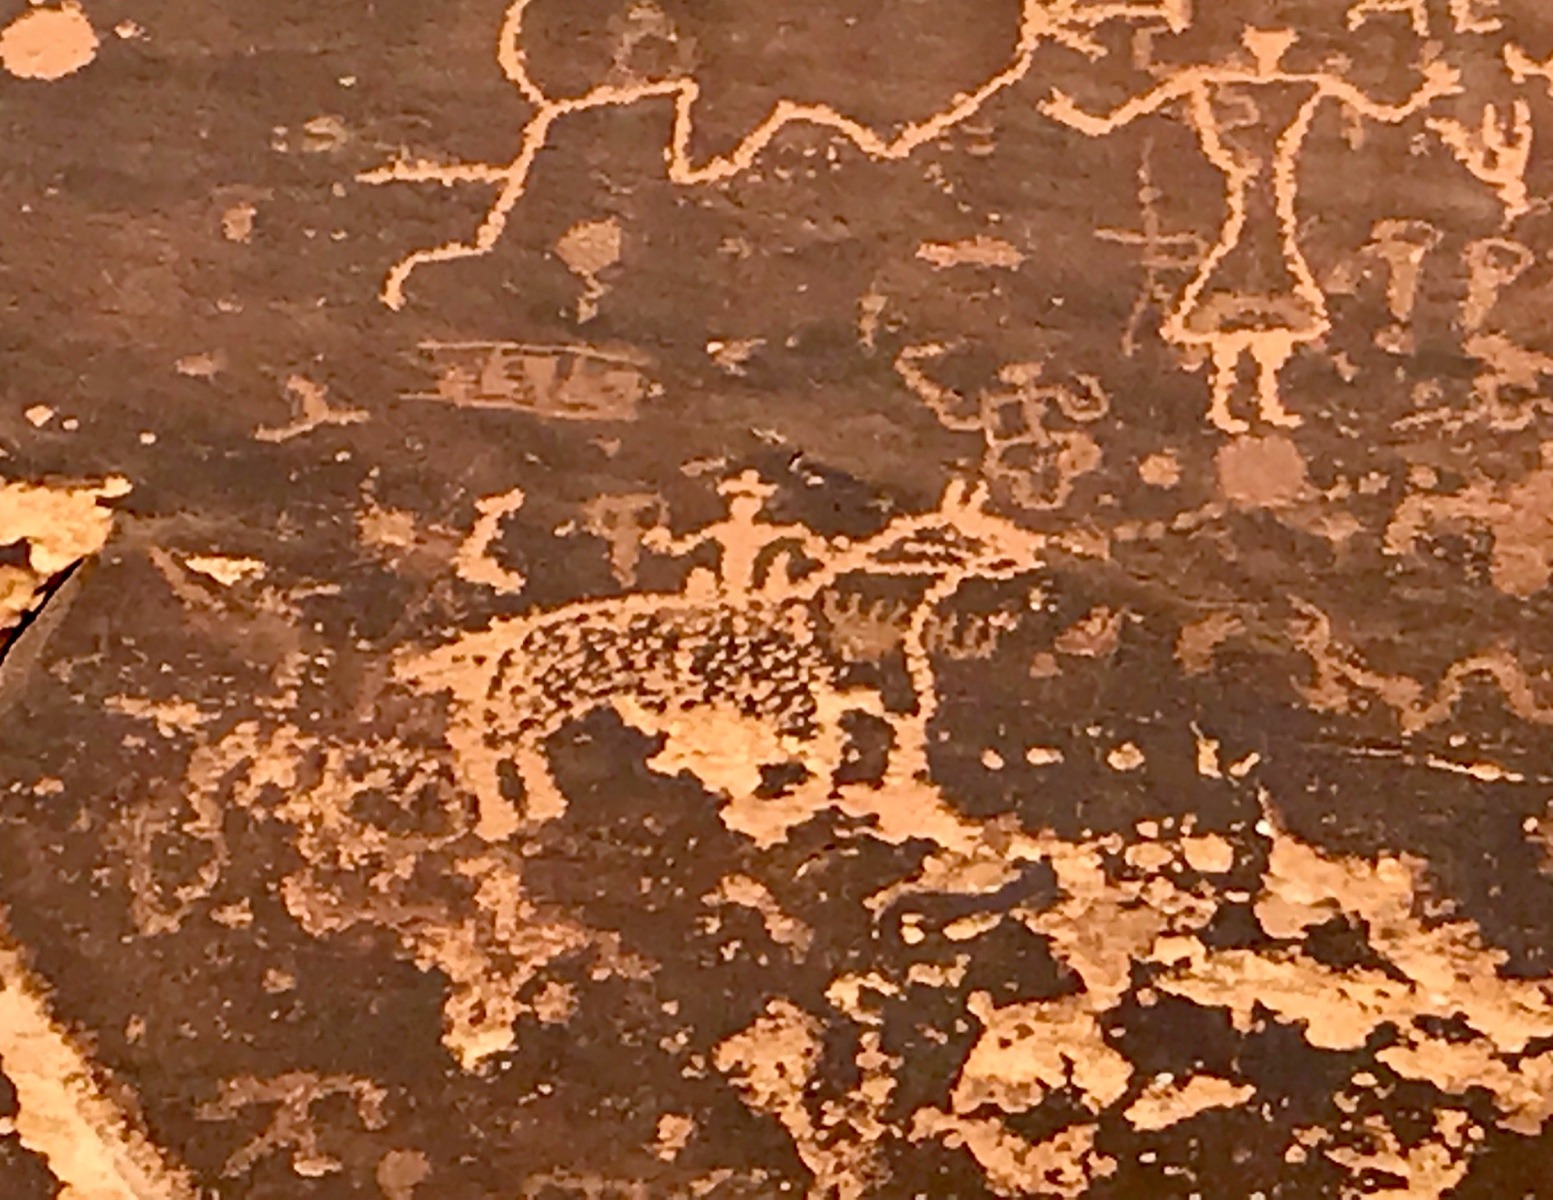 Re-writing the history of who was in the West first?  A cowboy image is carved into a rock wall, over the top of ancient indigenous petroglyphs near Bluff, Utah. Photo by Betsy Gaines Quammen